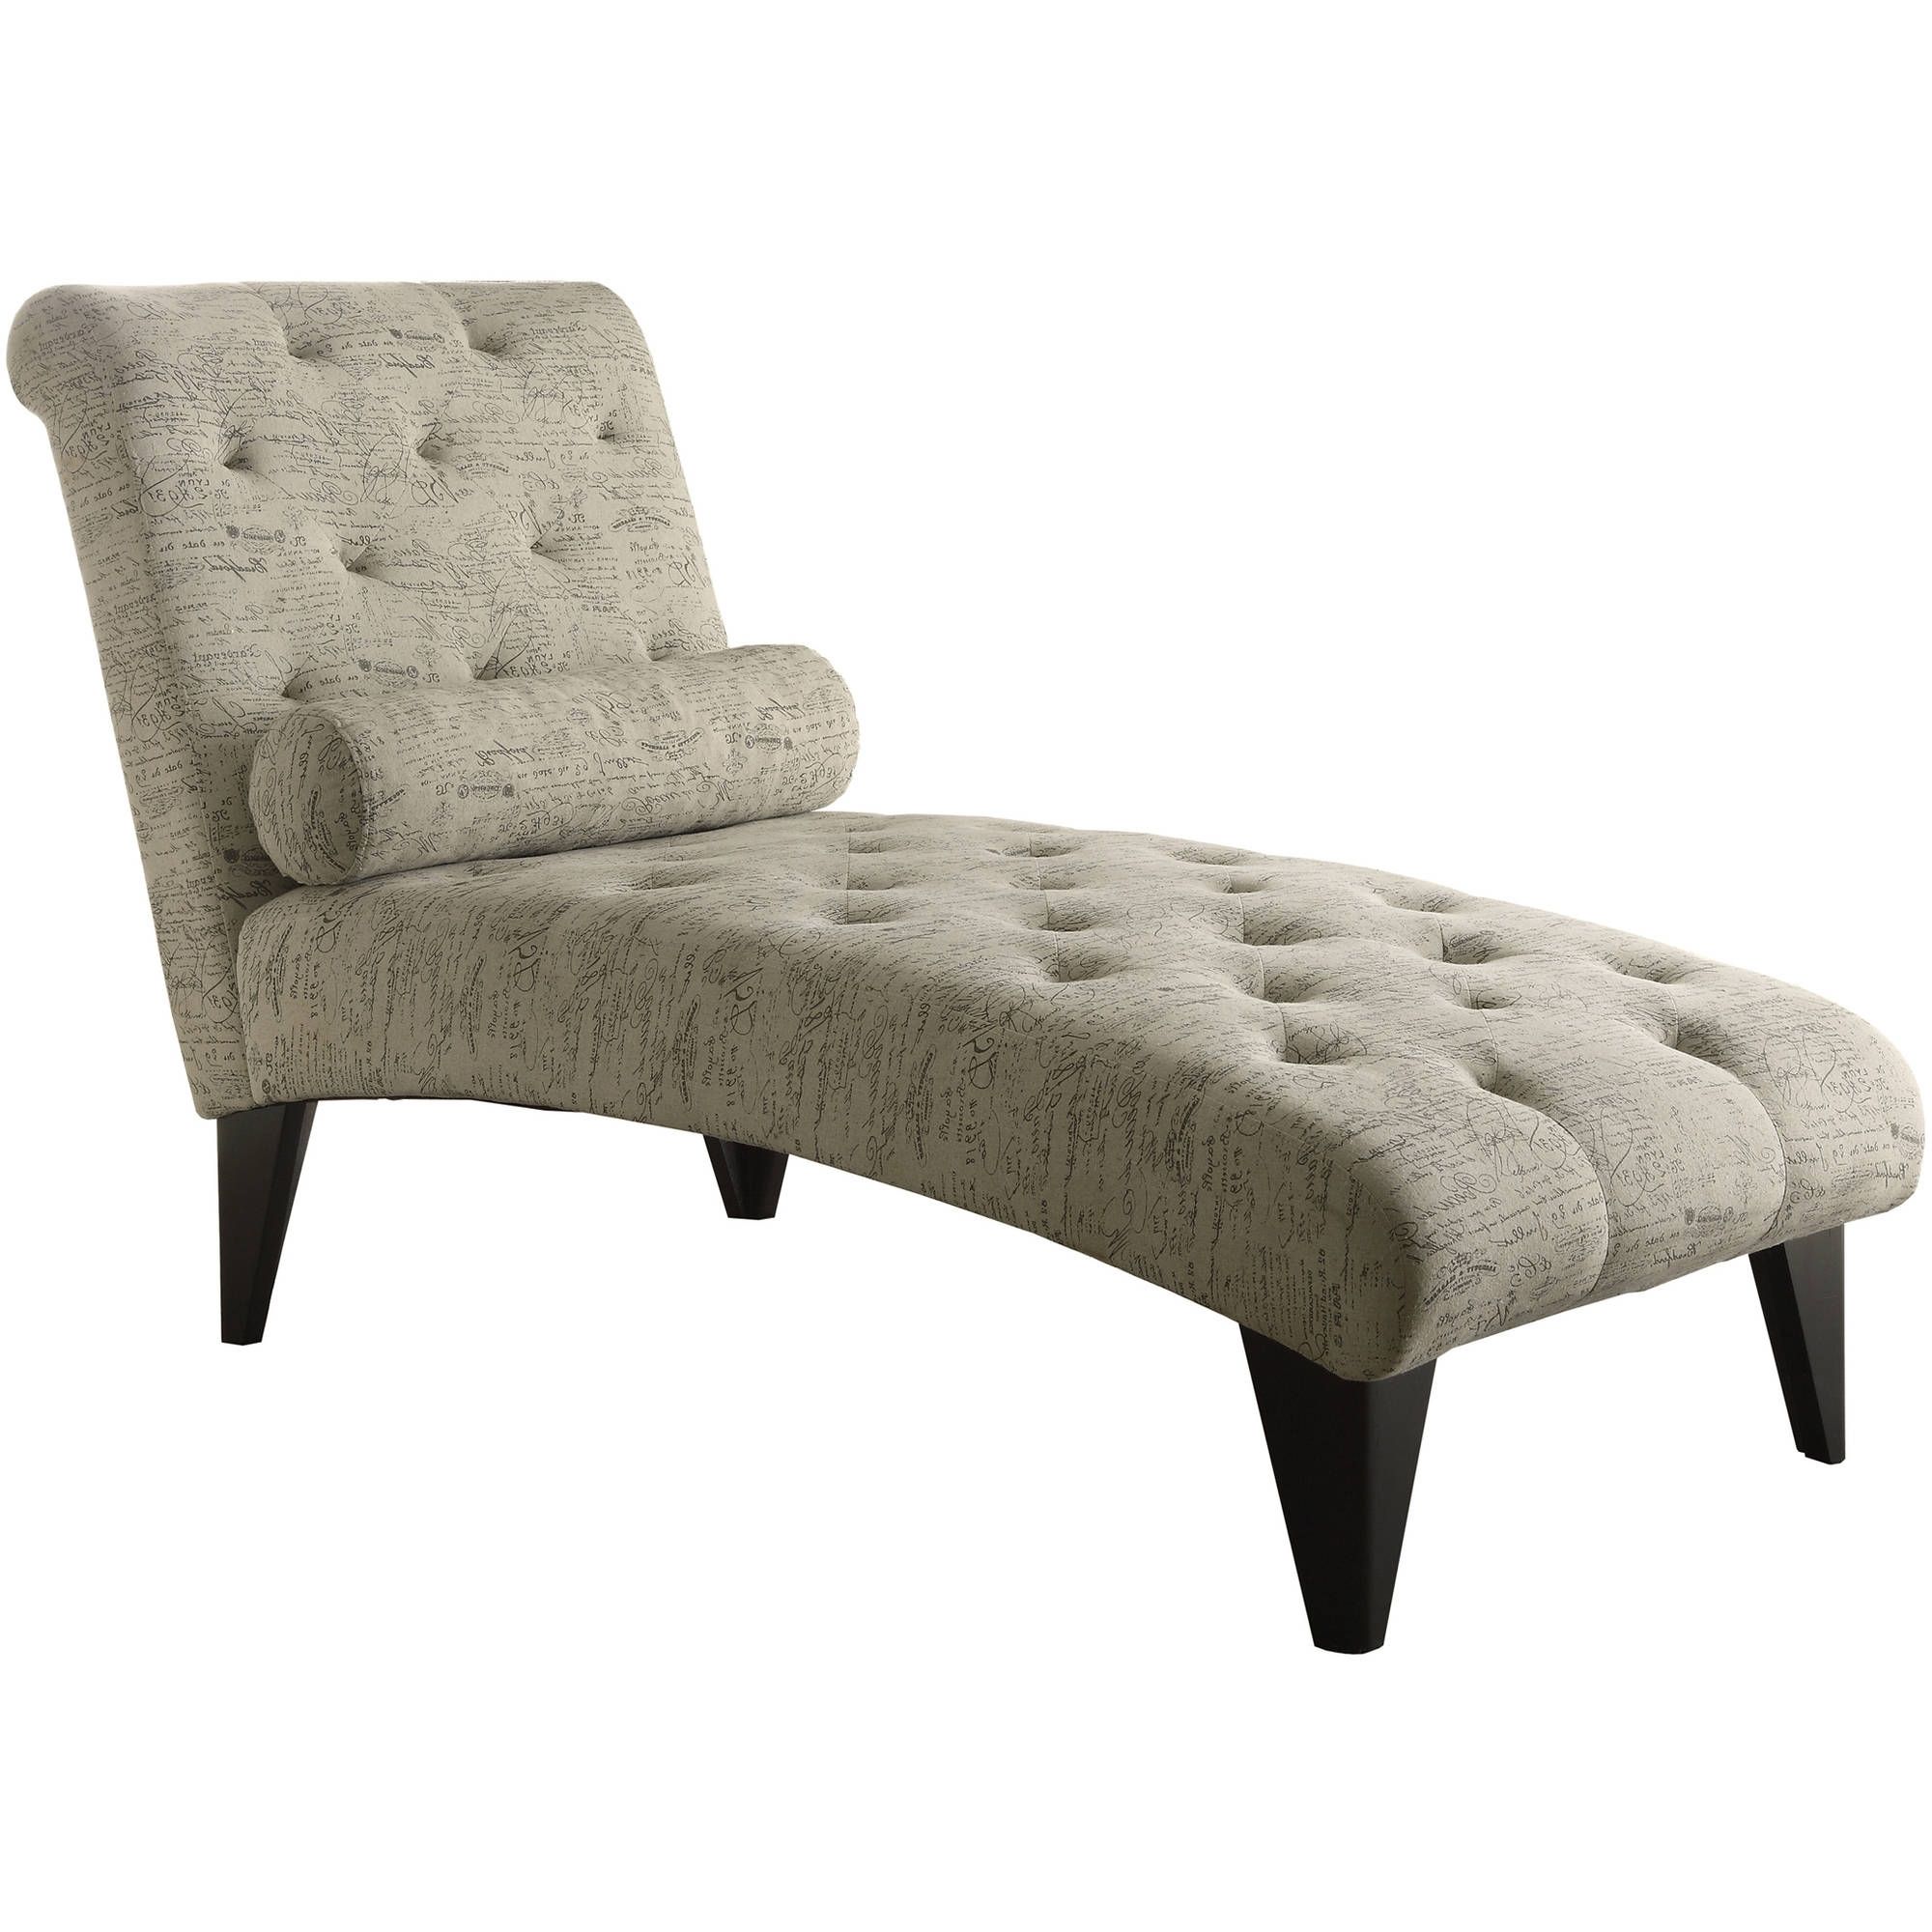 Chaise Lounge Chairs Under $300 For Widely Used Chaise Lounges – Walmart (View 4 of 15)